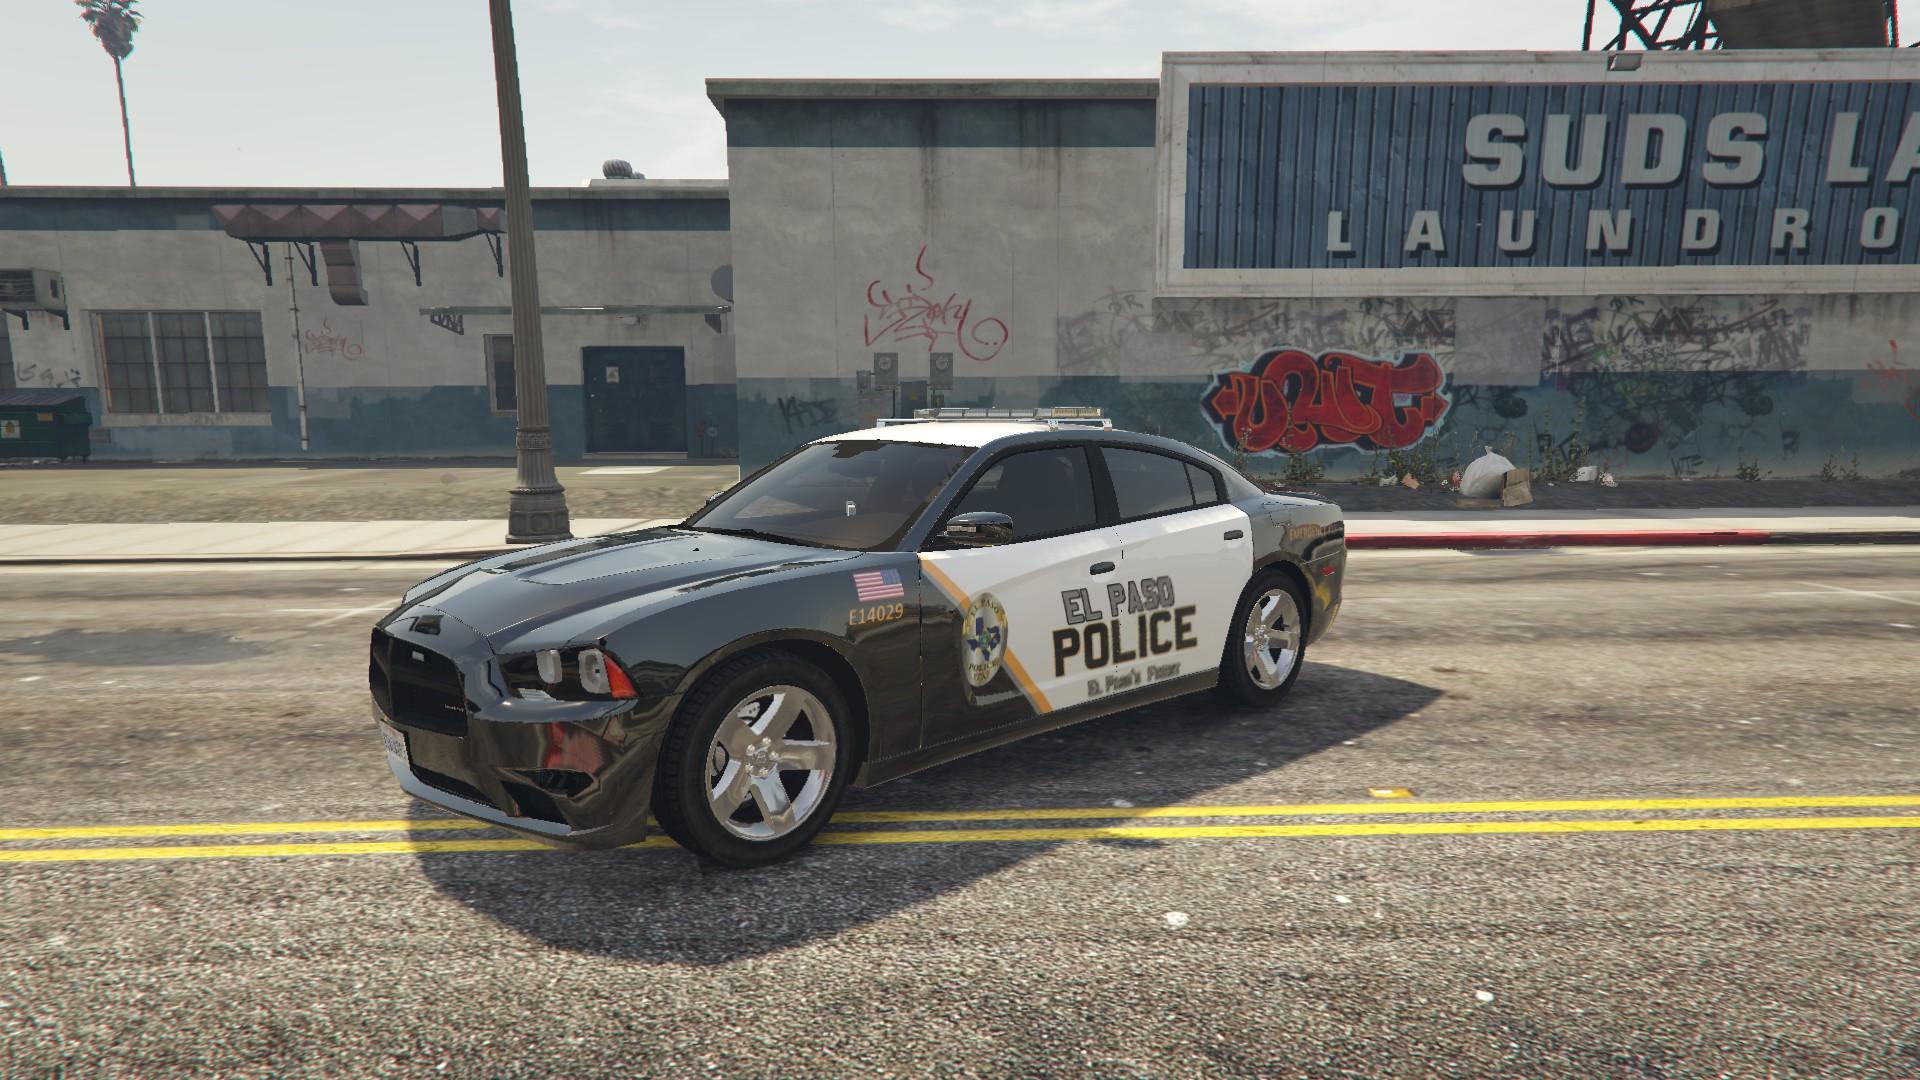 El Paso Police Skin for '13 Charger.